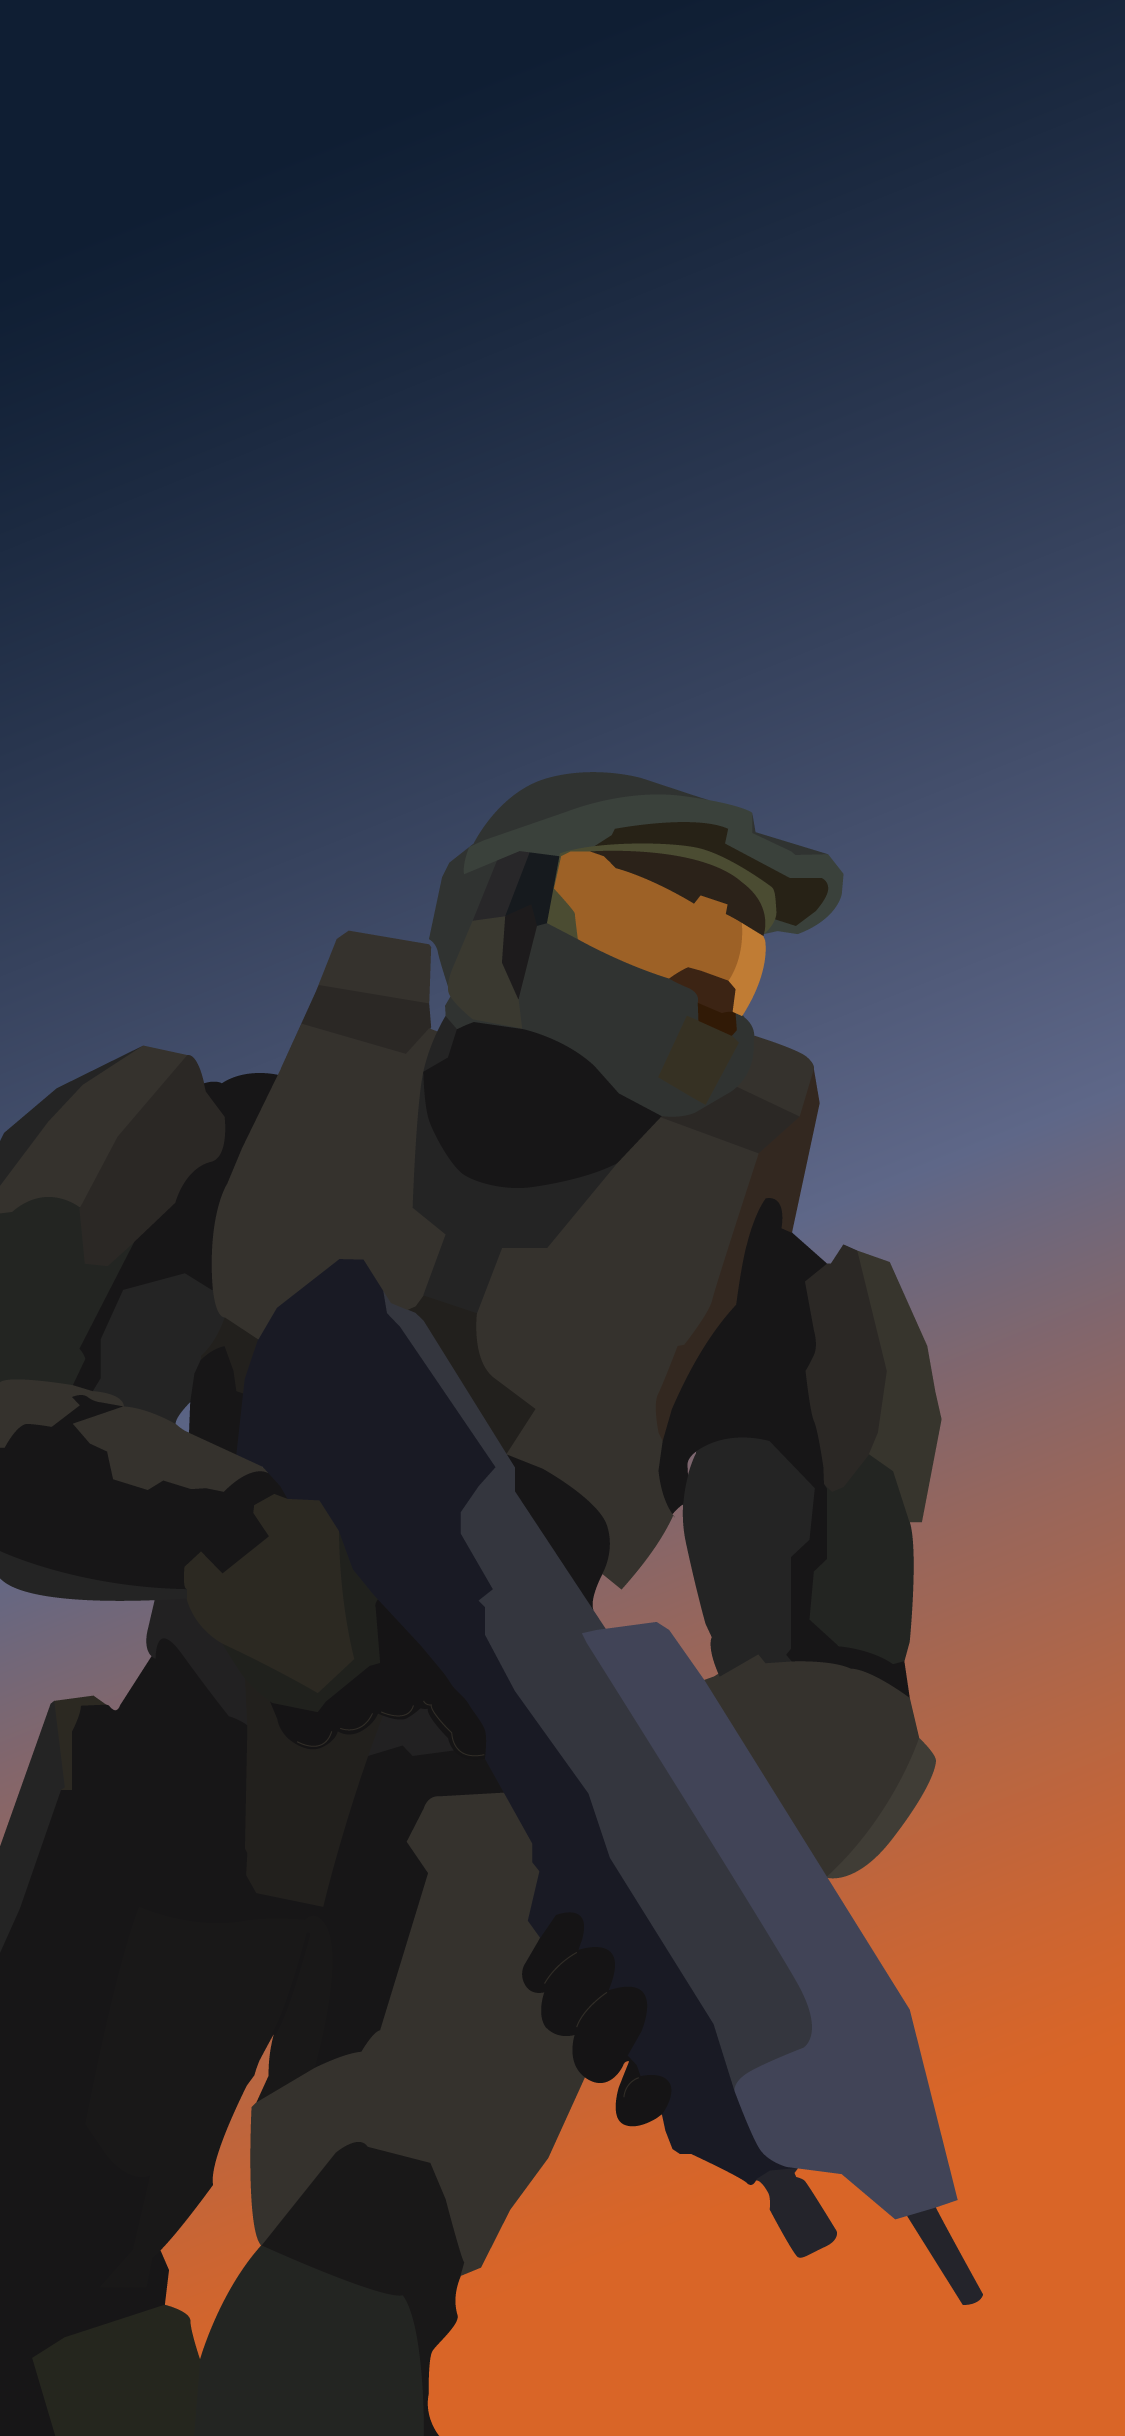 Halo Wallpapers For Iphone - HD Wallpaper 